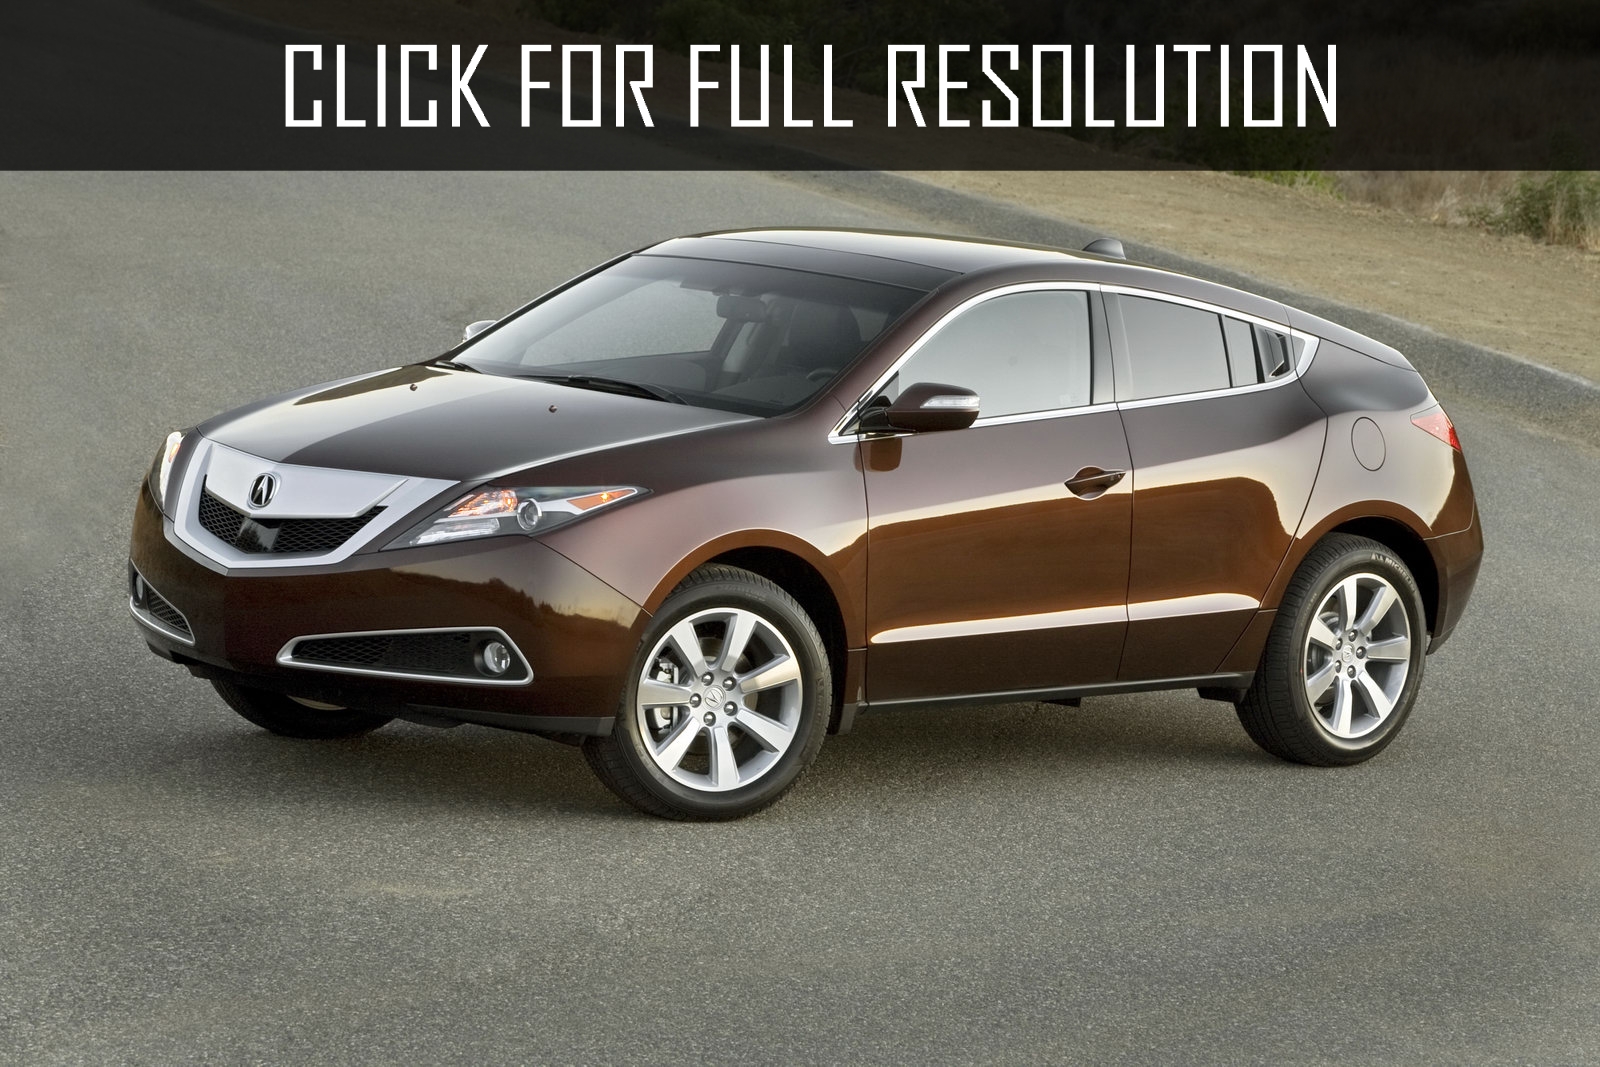 Acura ZDX Advance package